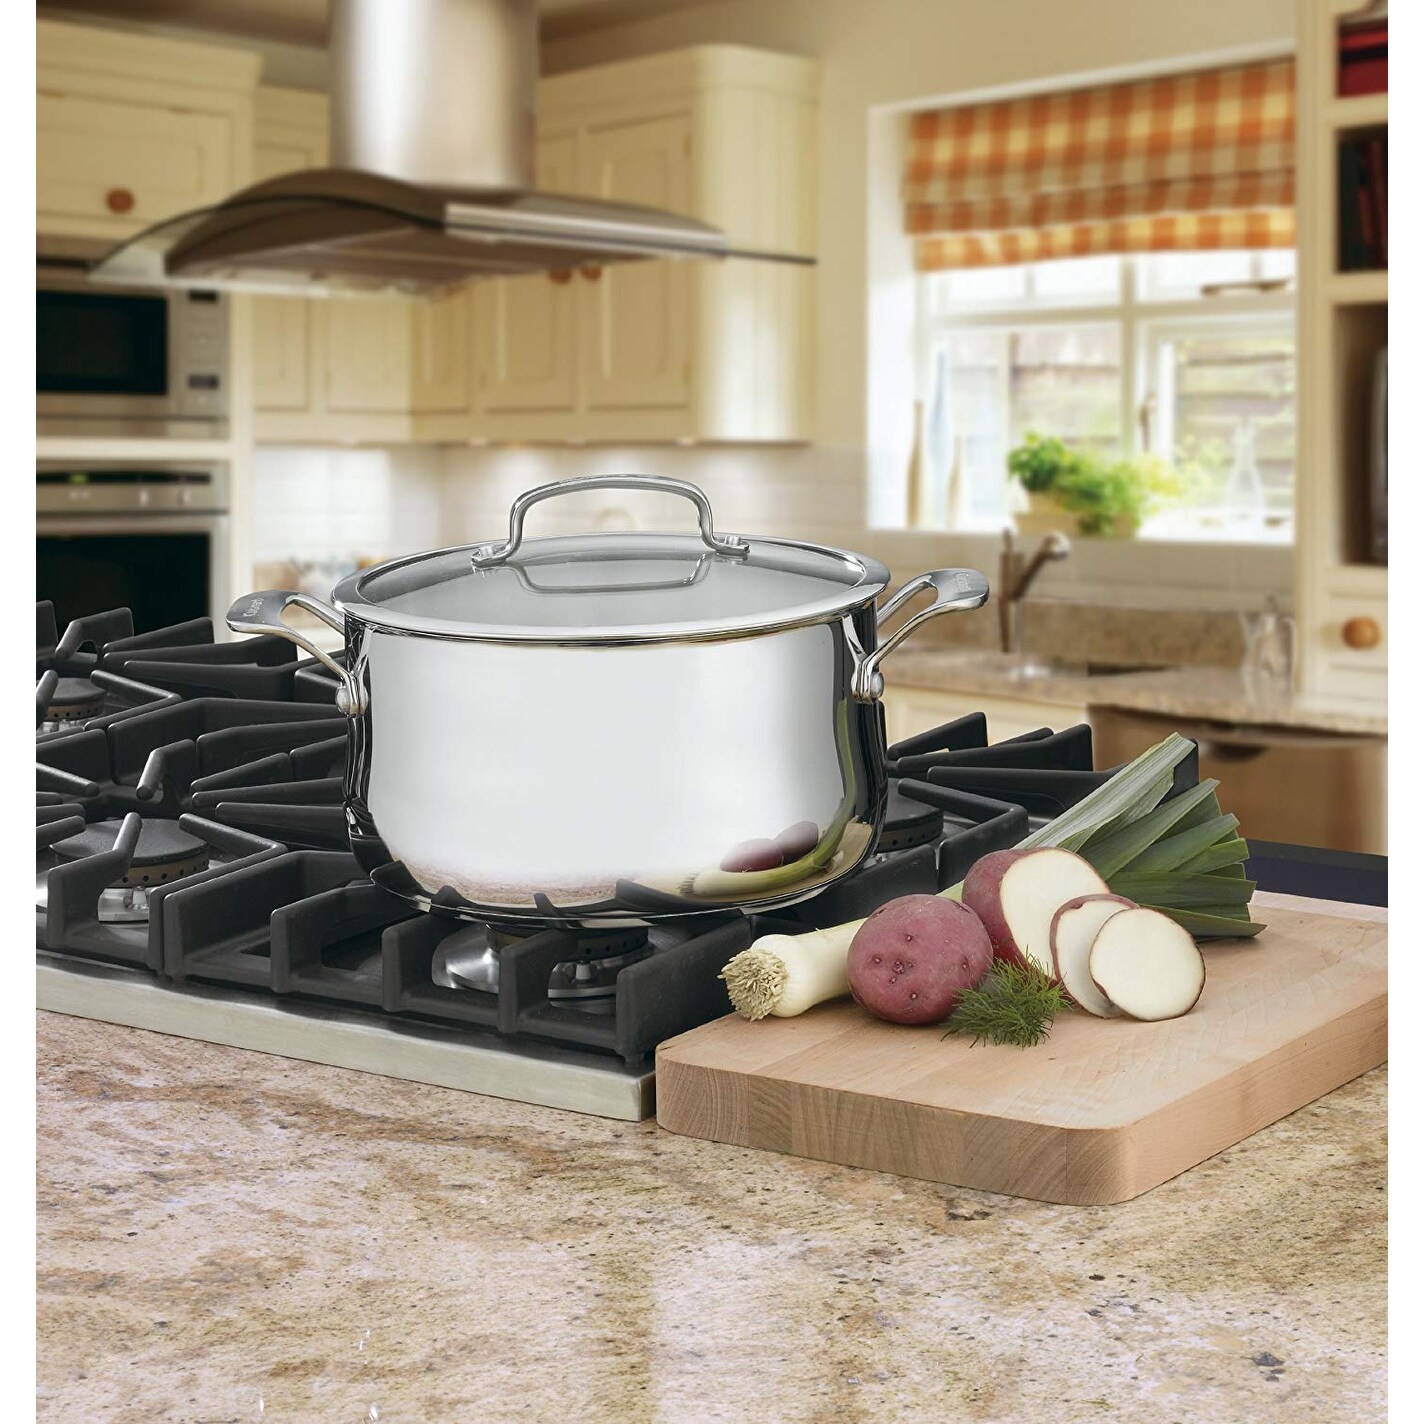 Cuisinart 419-18P 2-Quart Pour Saucepan with Cover Contour Cookware,  Stainless Steel